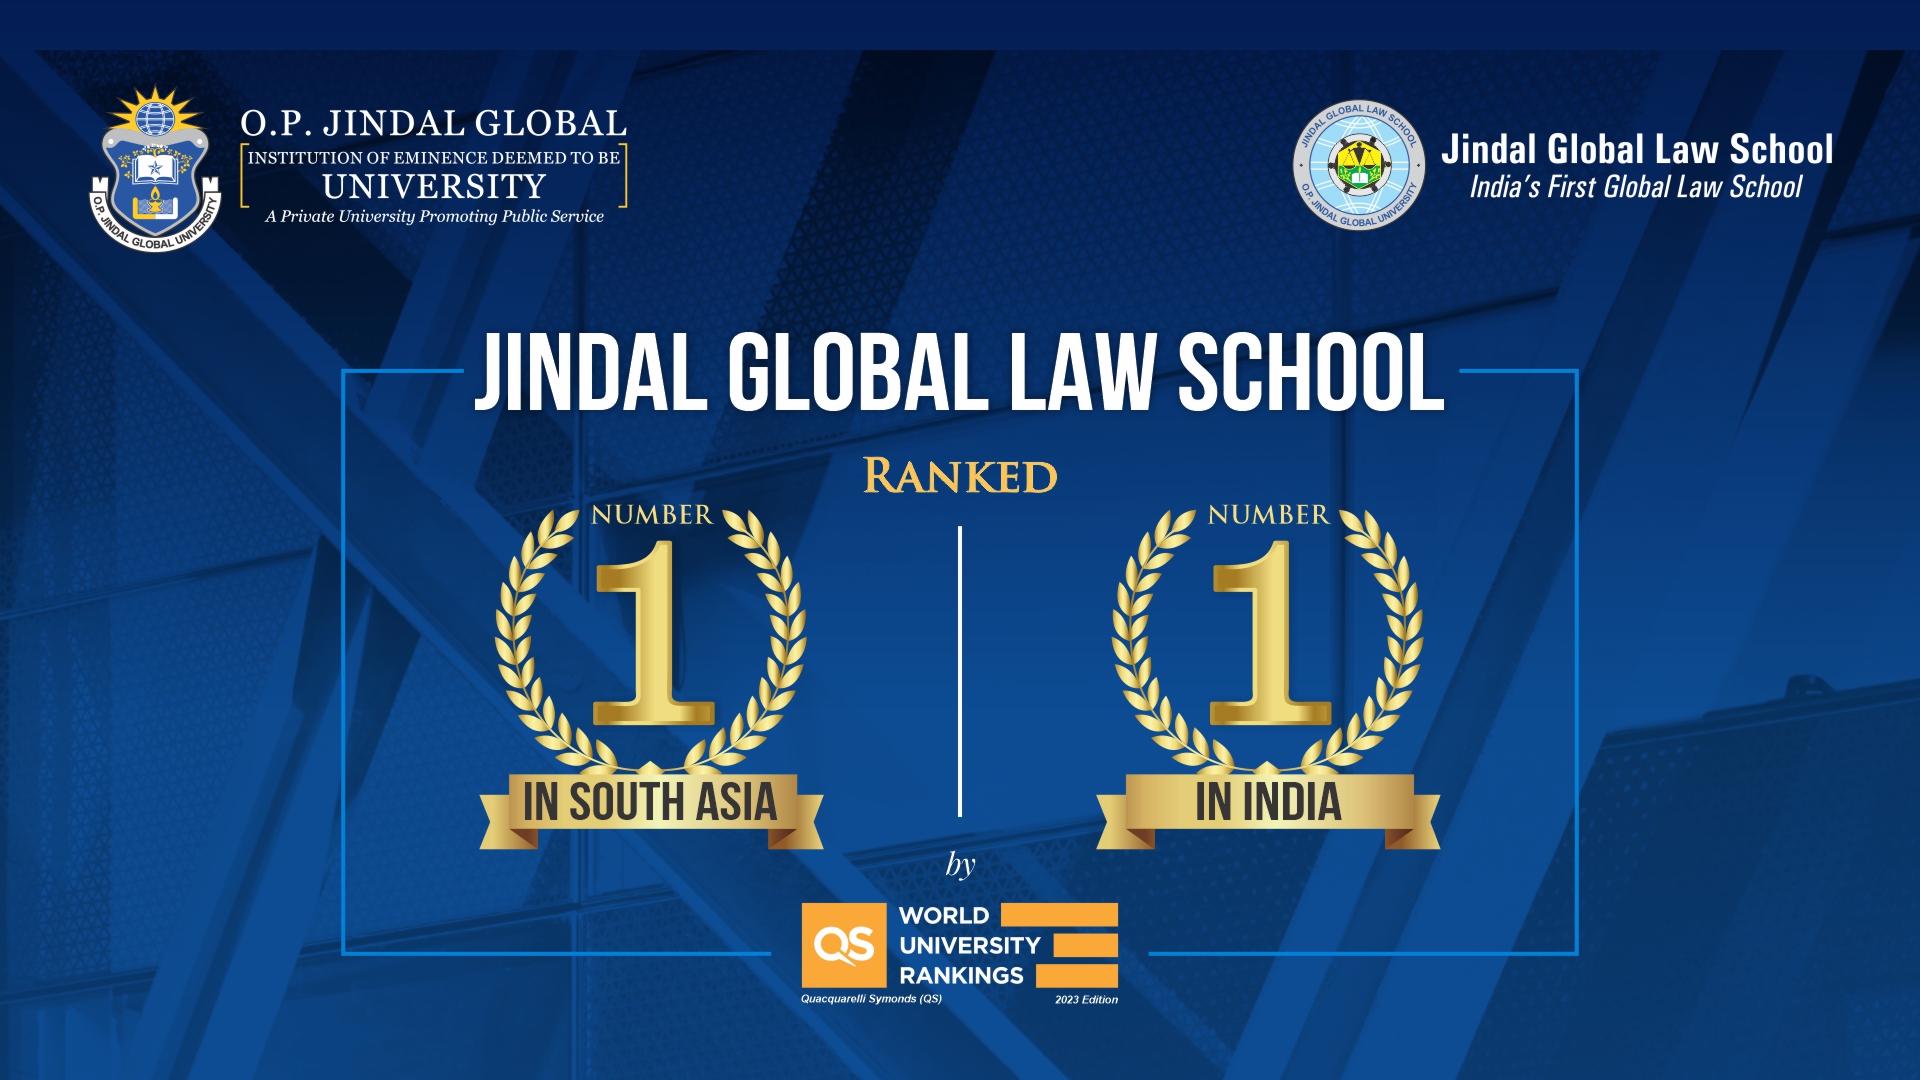 O.P. Jindal Global Law School ranked Number 1 in South Asia and Number 1 in India by Quacquarelli Symonds (QS) World University Rankings 2023 Edition.